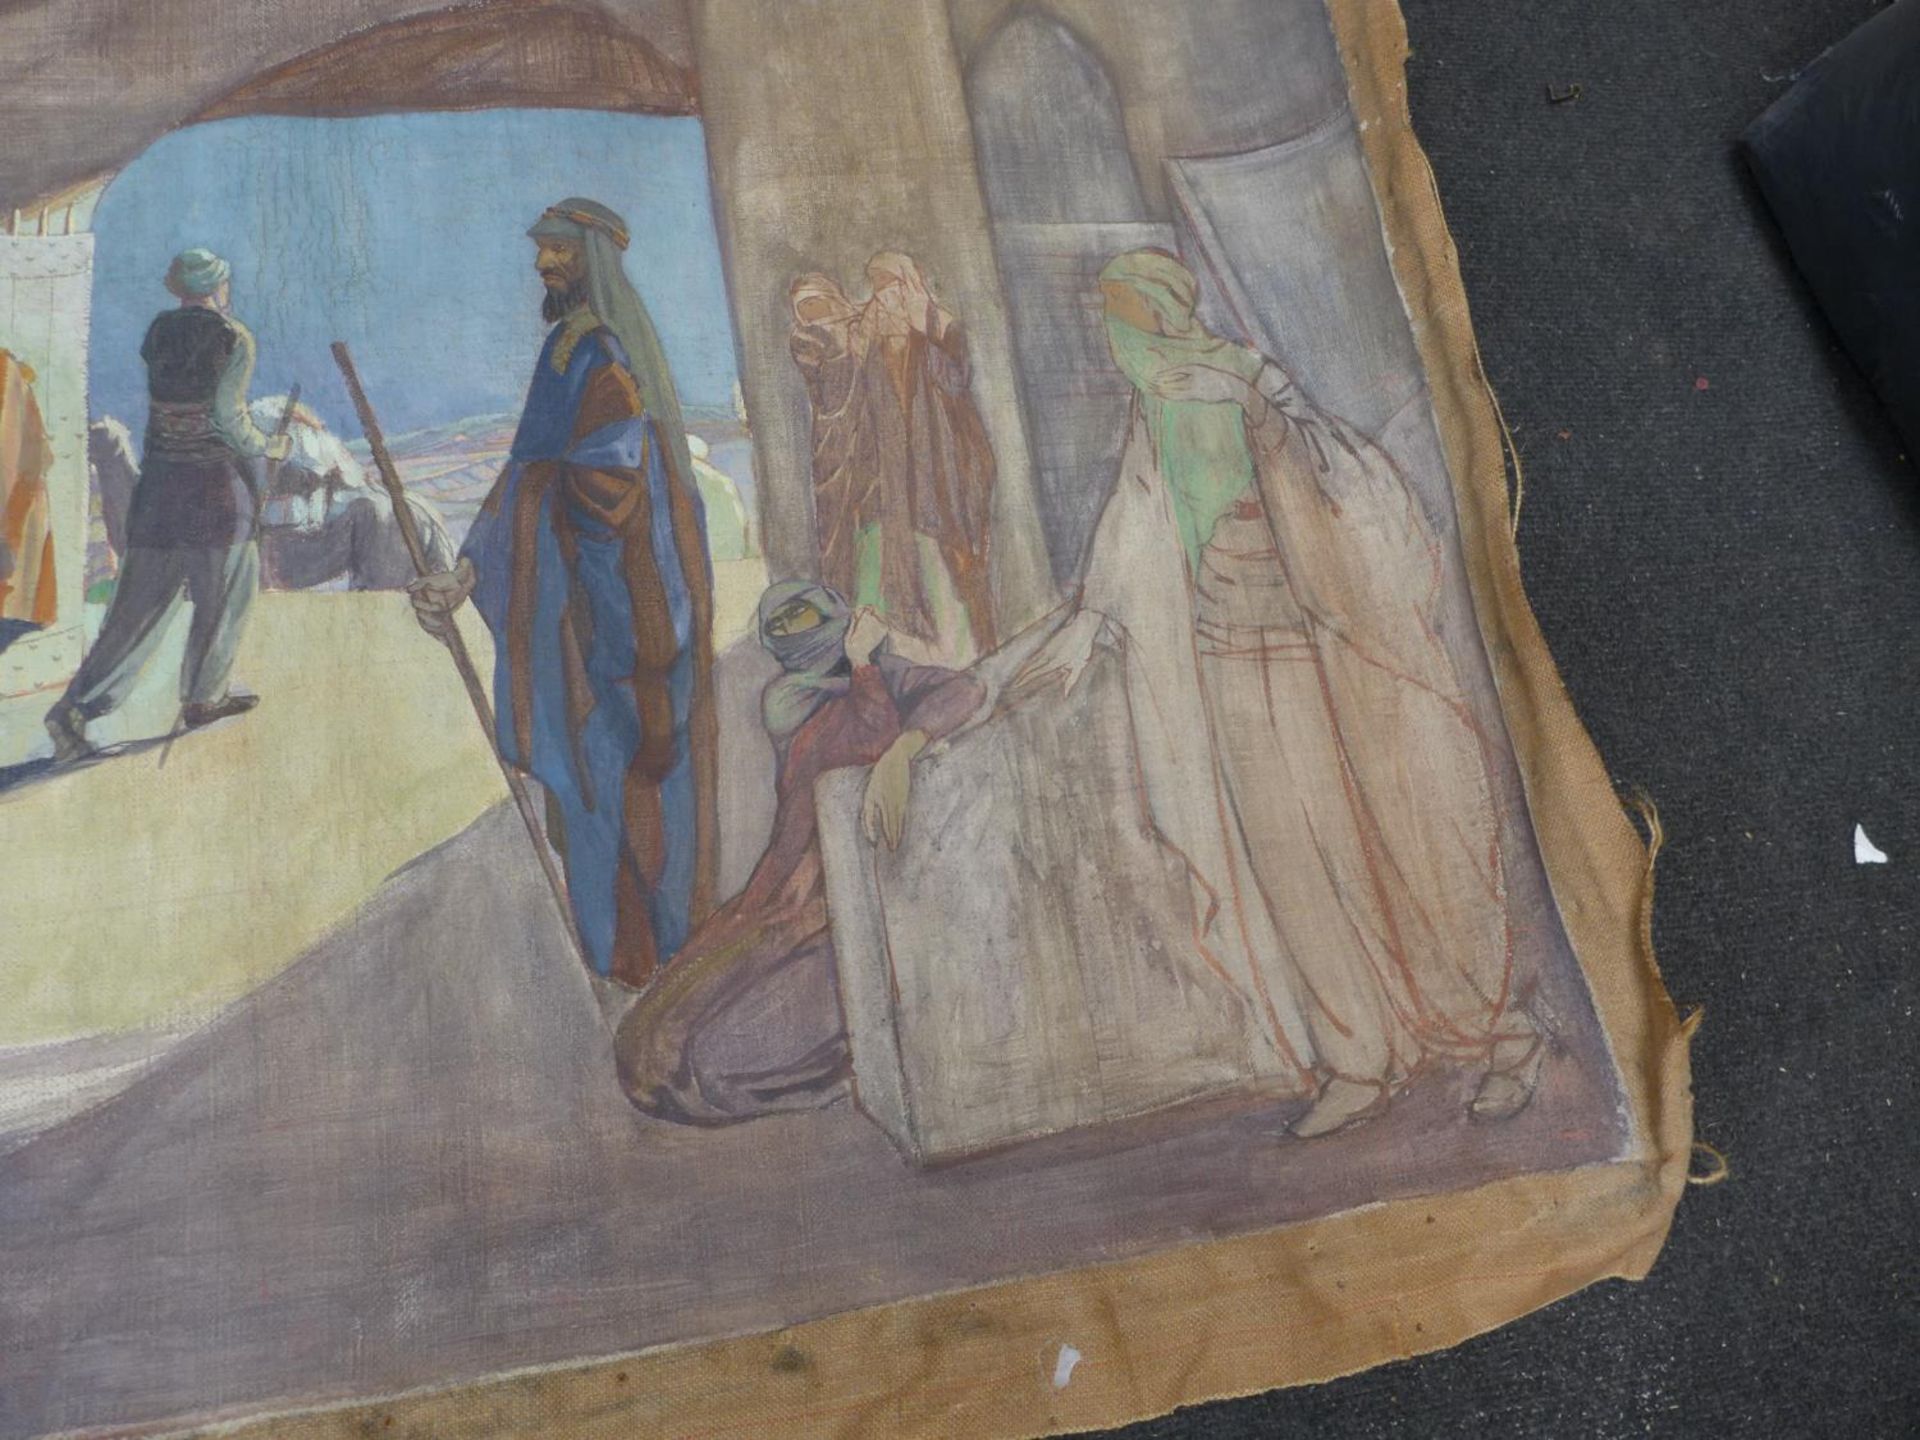 A LARGE EARLY 20TH CENTURY OIL ON CANVAS DEPICTING AN ARAB SCENE, 82X124CM - Image 3 of 5